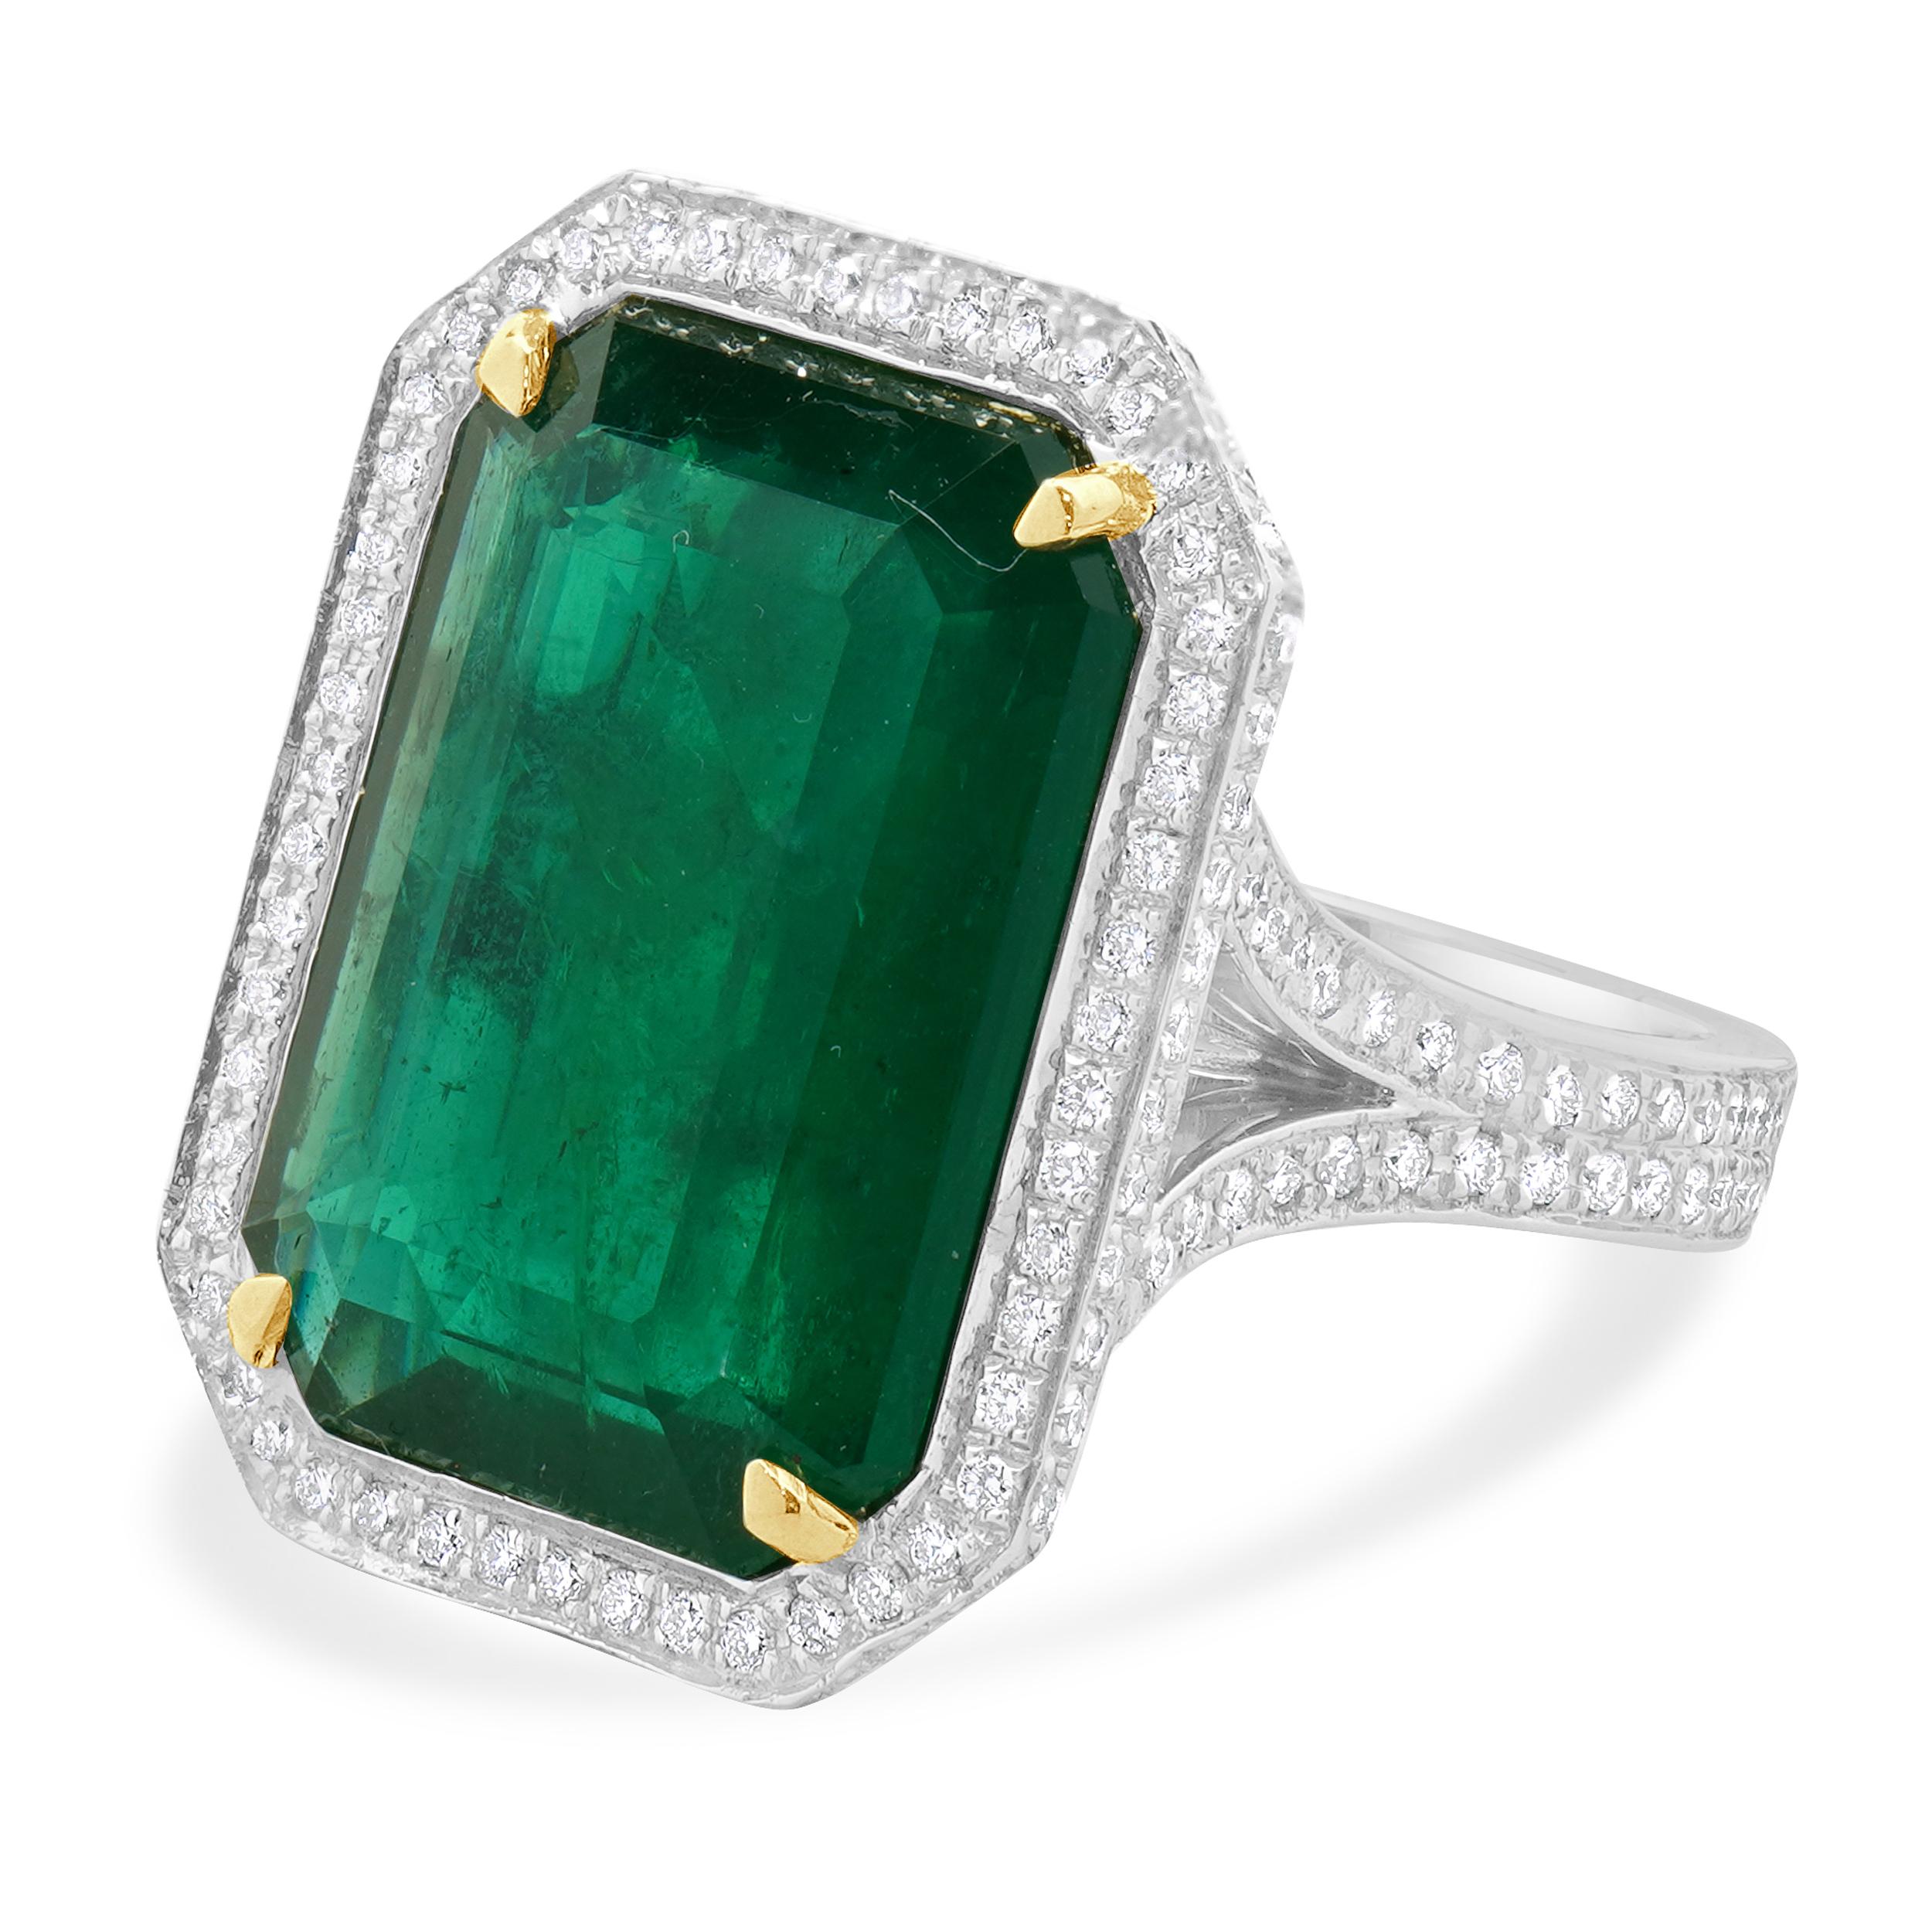 Designer: custom
Material: 18K white gold
Emerald: 1 emerald cut = 11.19ct
Diamond: round brilliant cut = 0.79cttw
Color: H
Clarity: SI1
Ring Size: 6.5 (please allow two extra shipping days for sizing requests) 
Weight: 12.46 grams